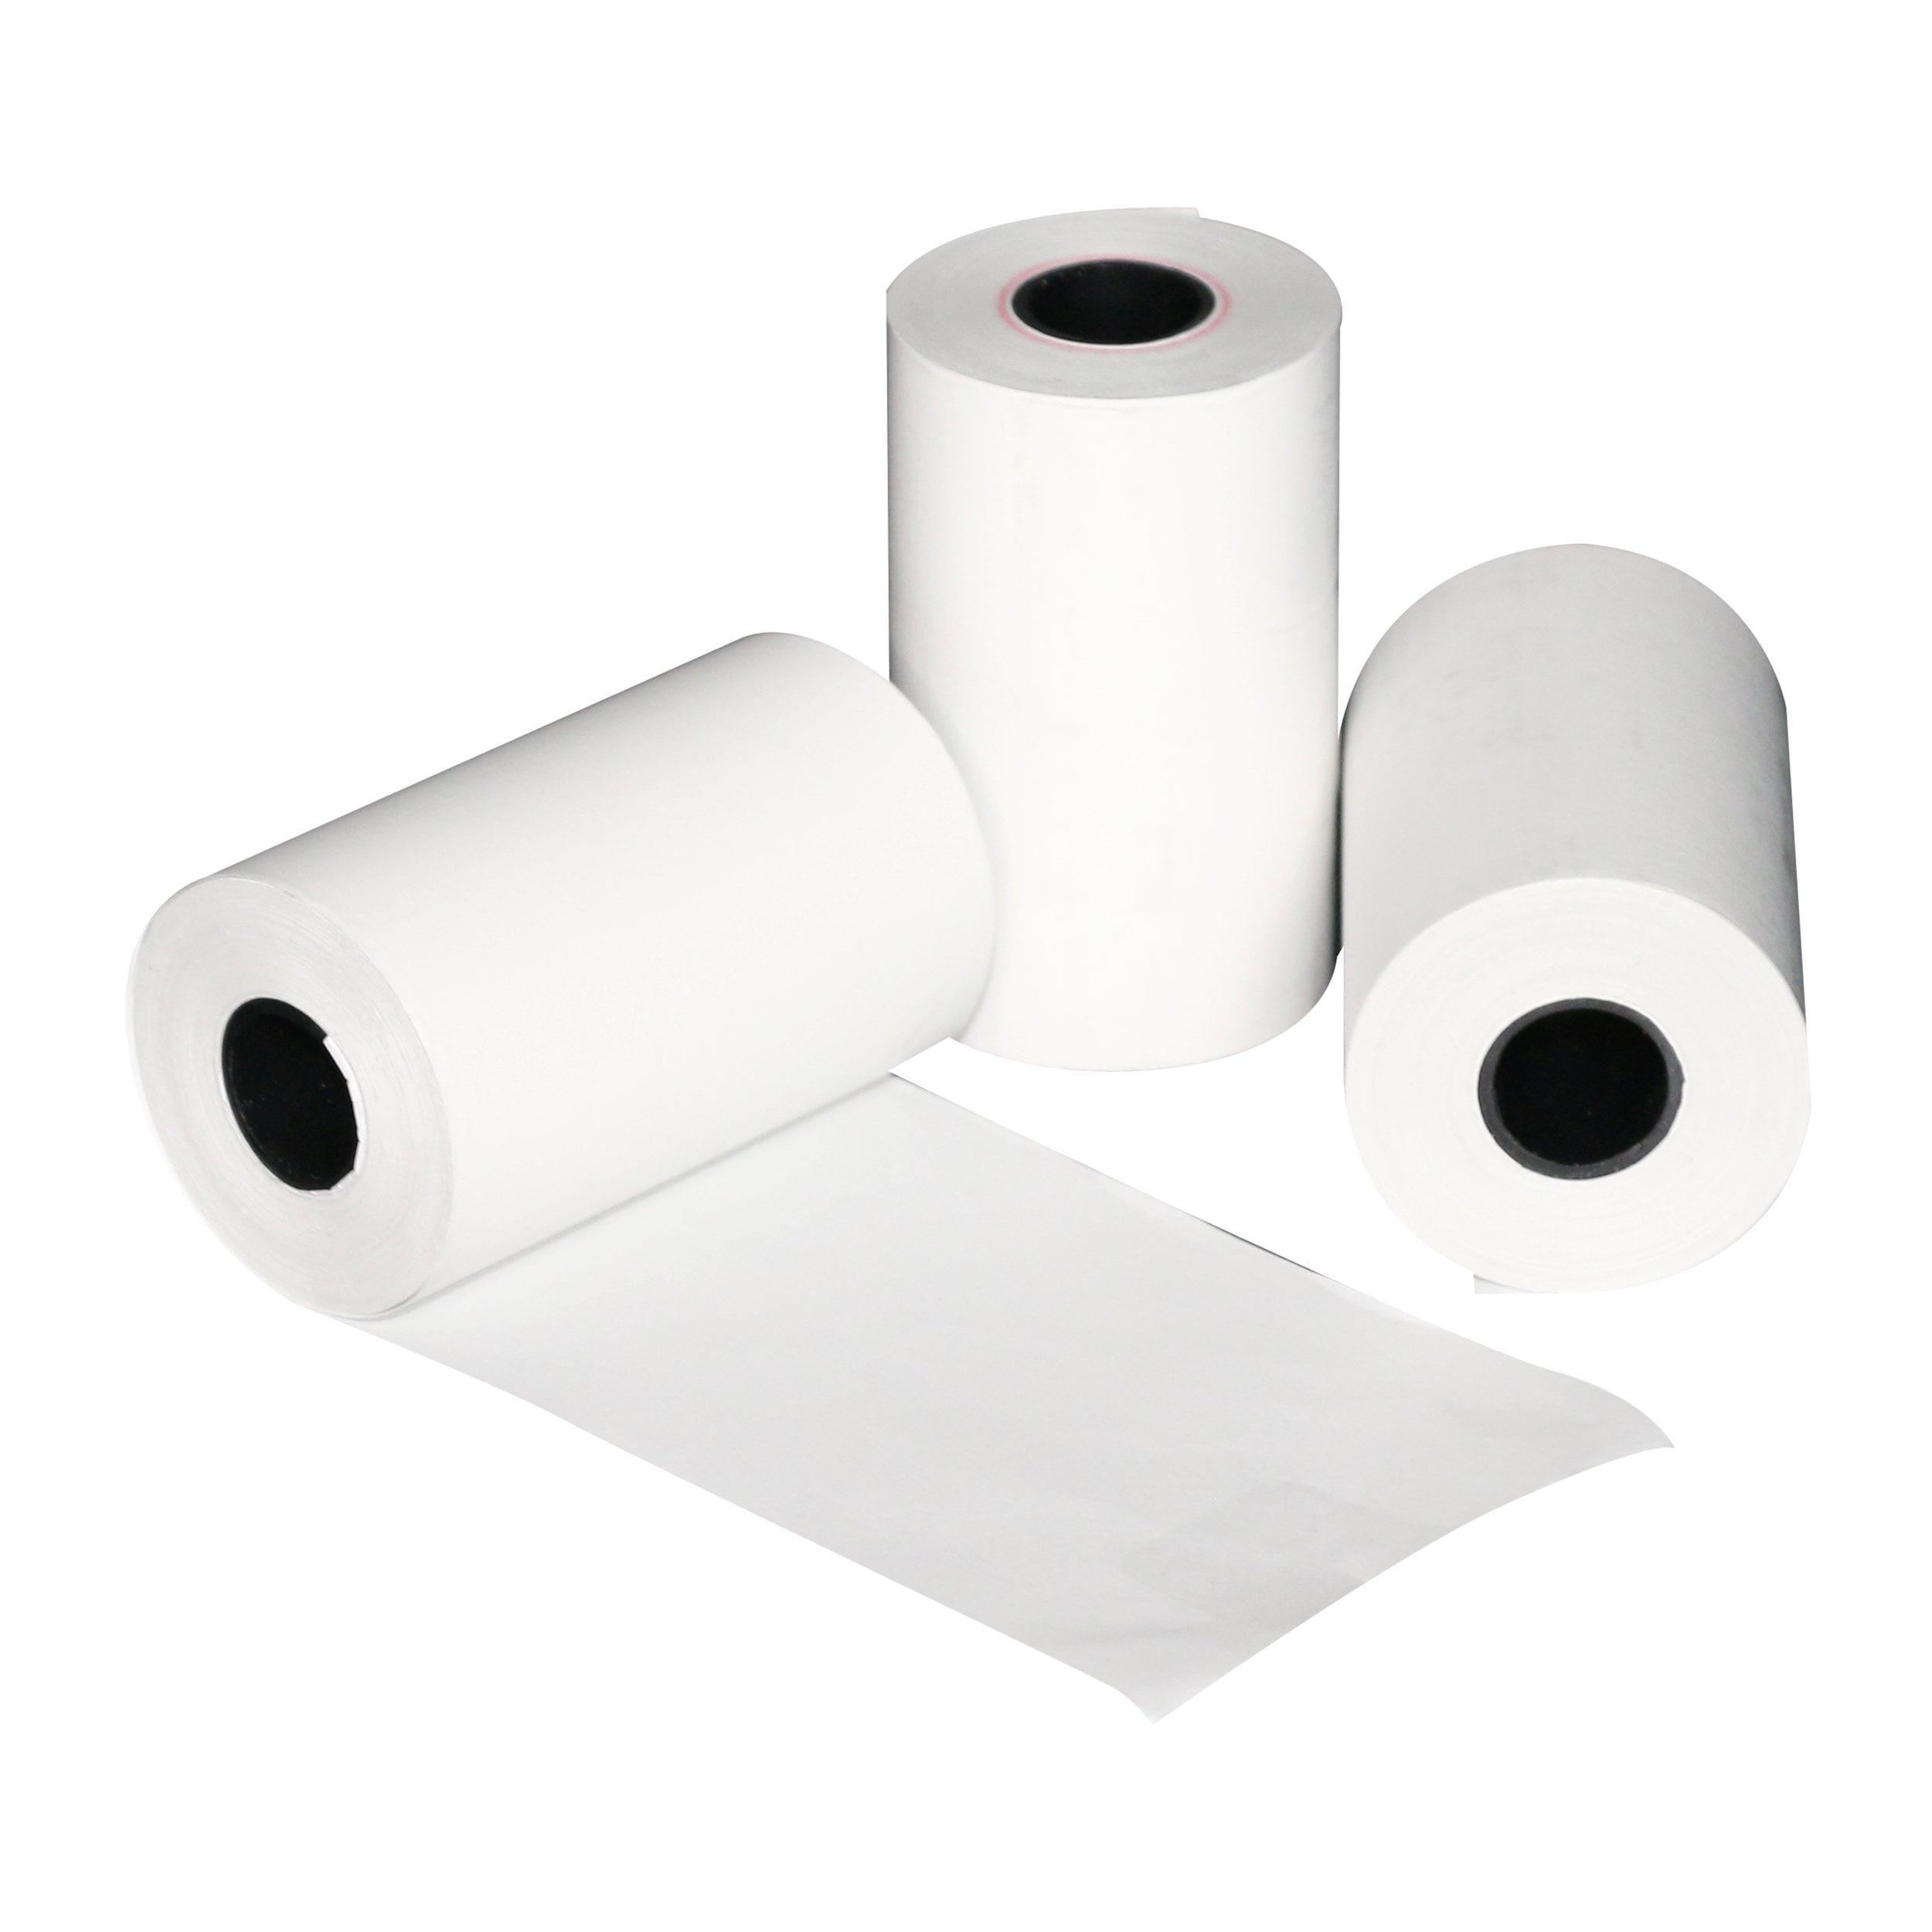 2 1/4 x 50 thermal paper  10 ROLLS **FREE SHIPPING**  Clover Mini 